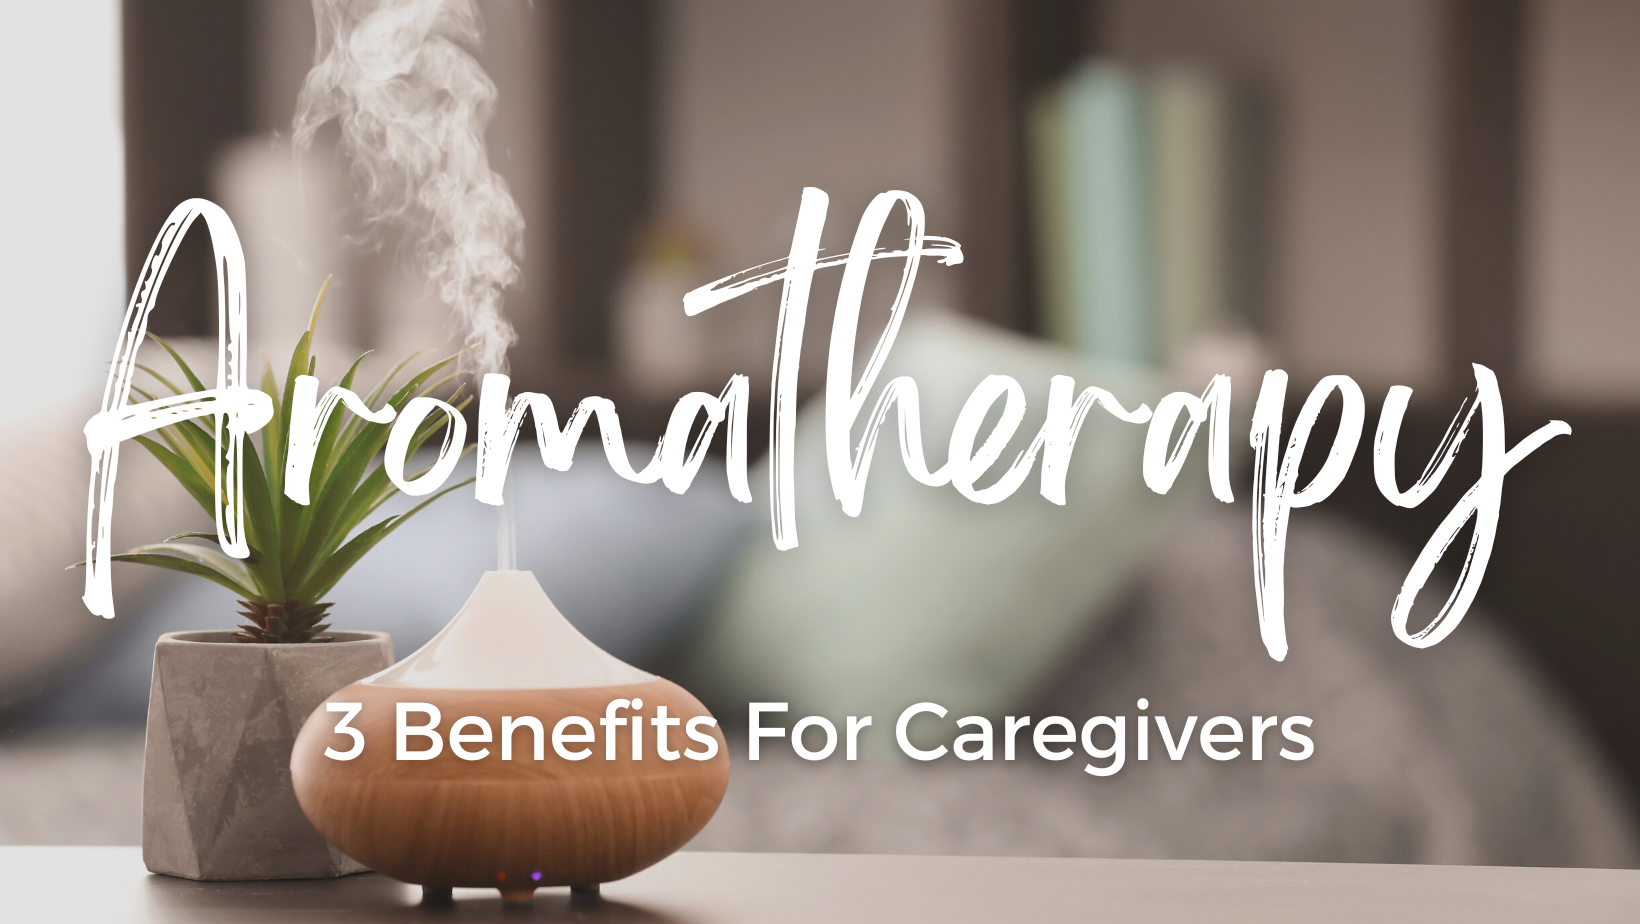 3 ways dementia caregivers benefit from aromatherapy